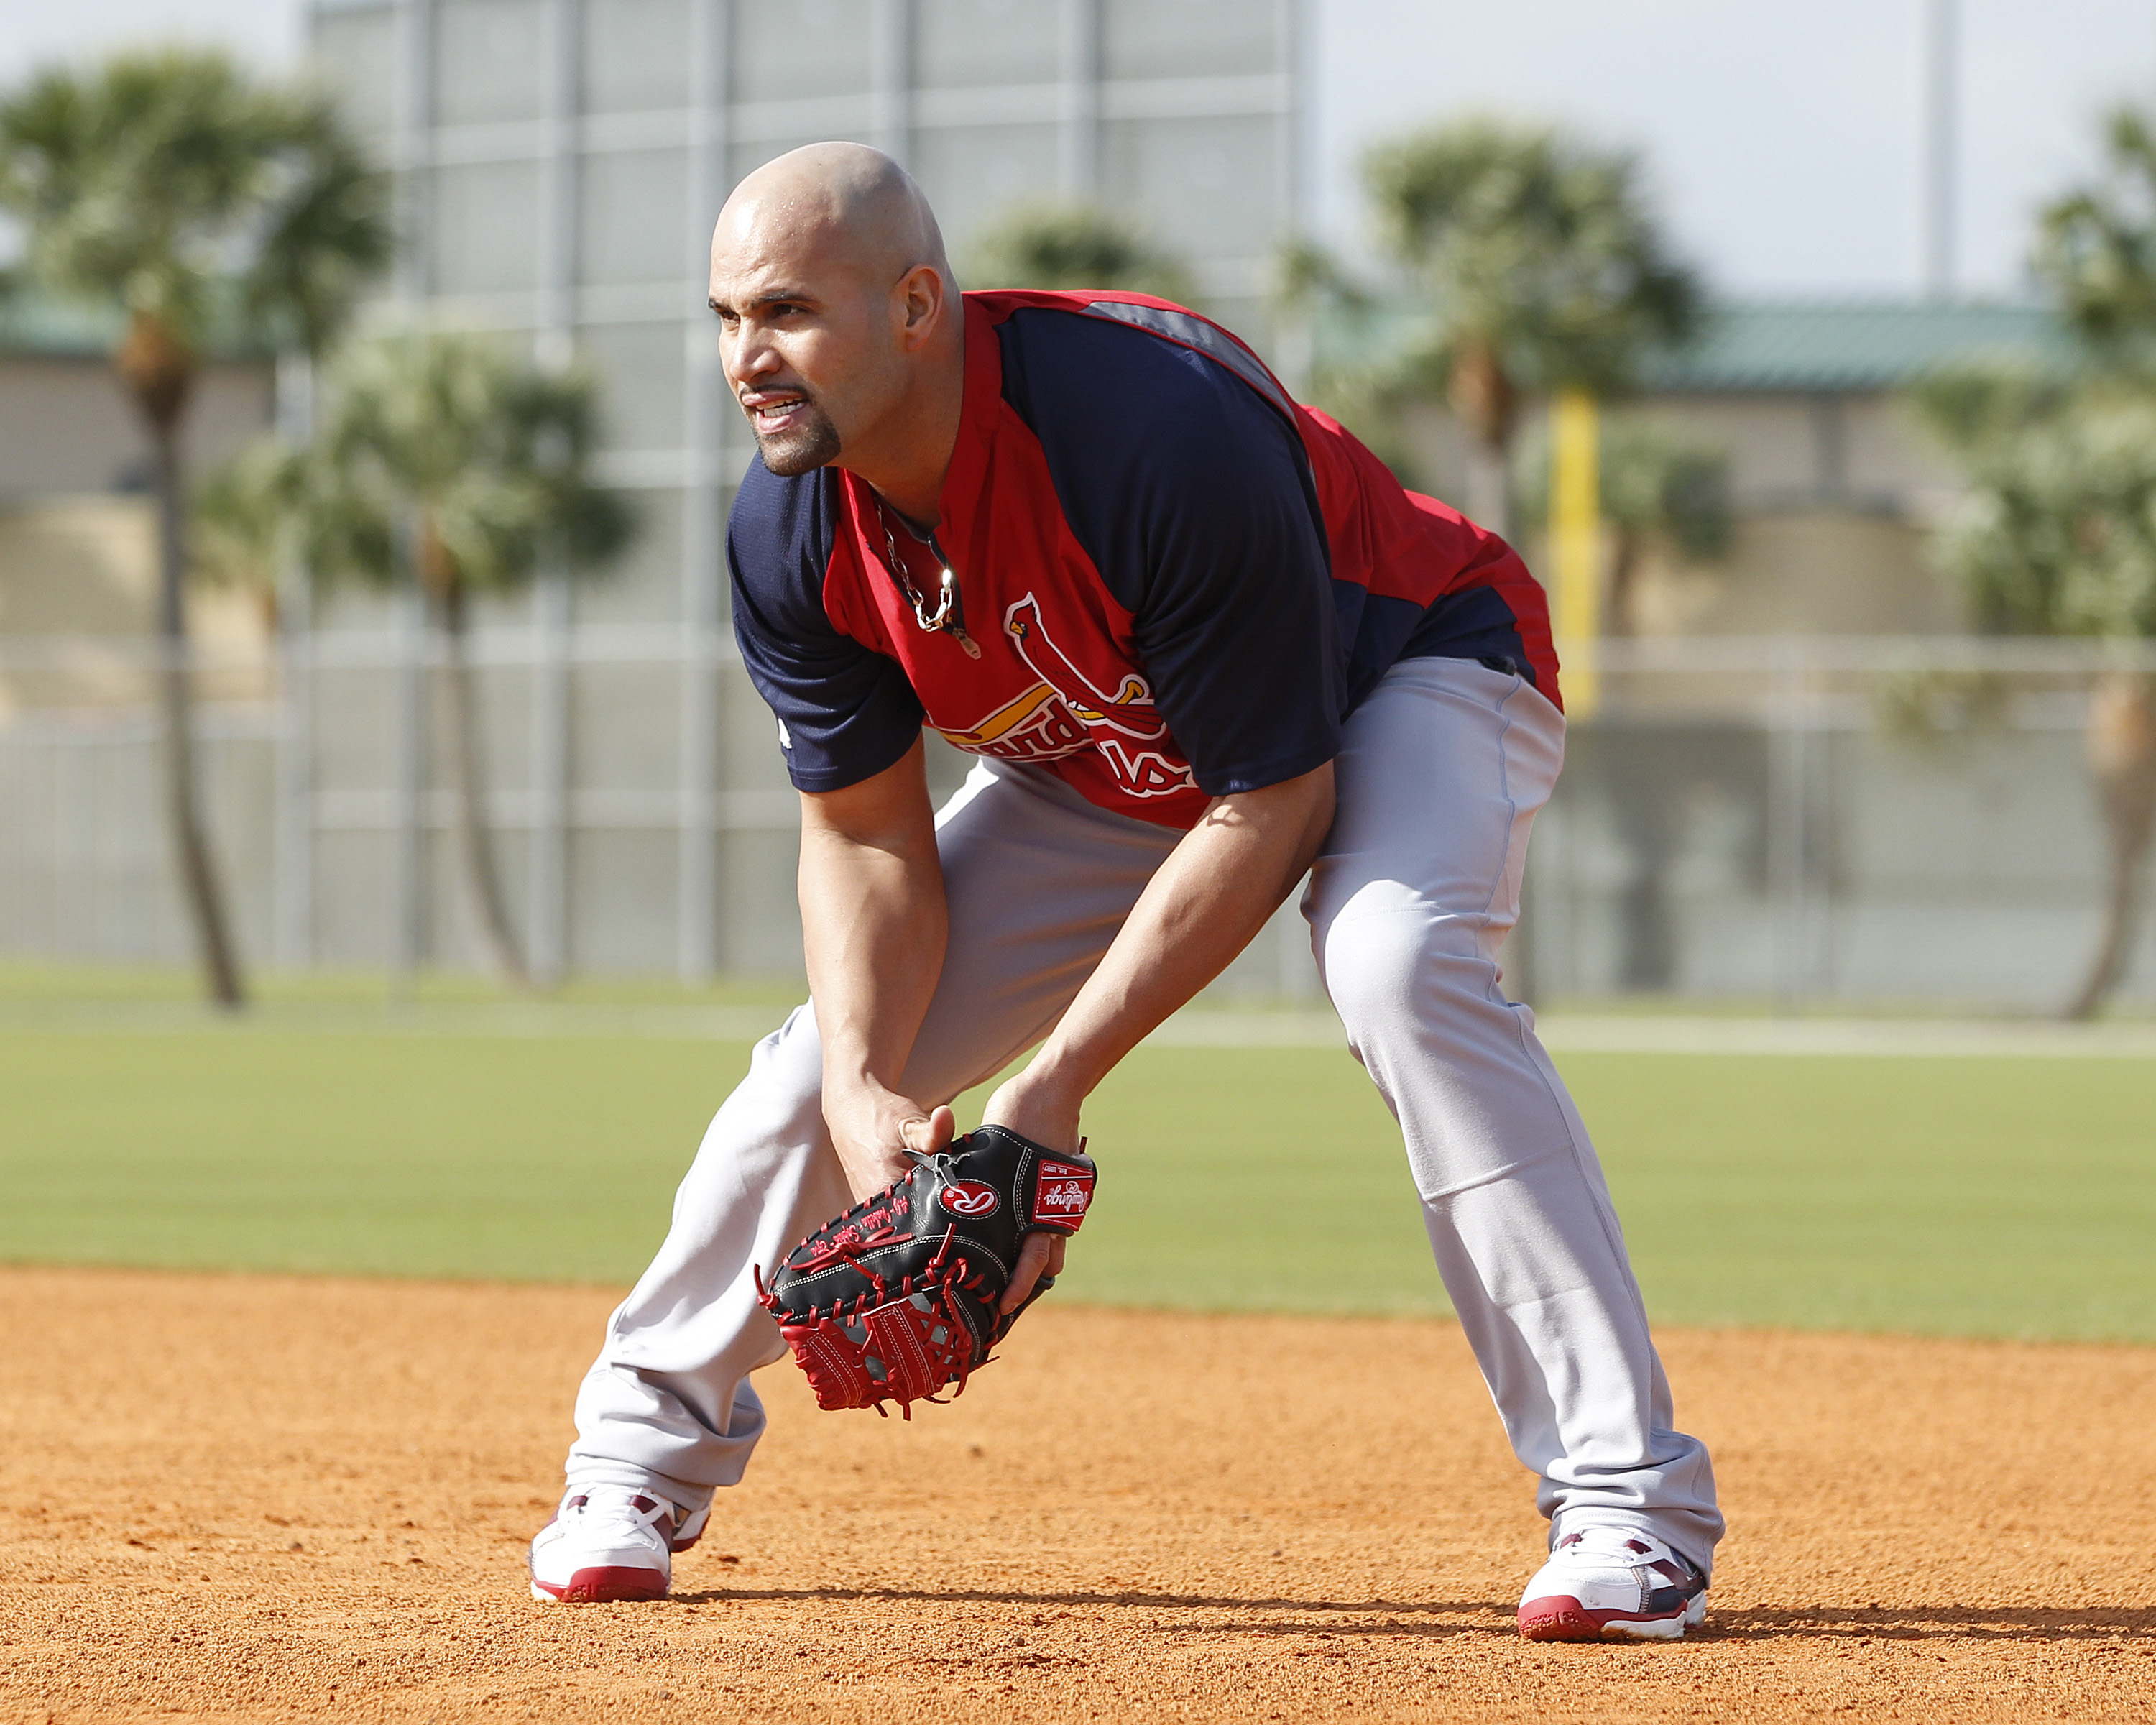 Albert Pujols Exits Cardinals: What the Media Is Saying – The